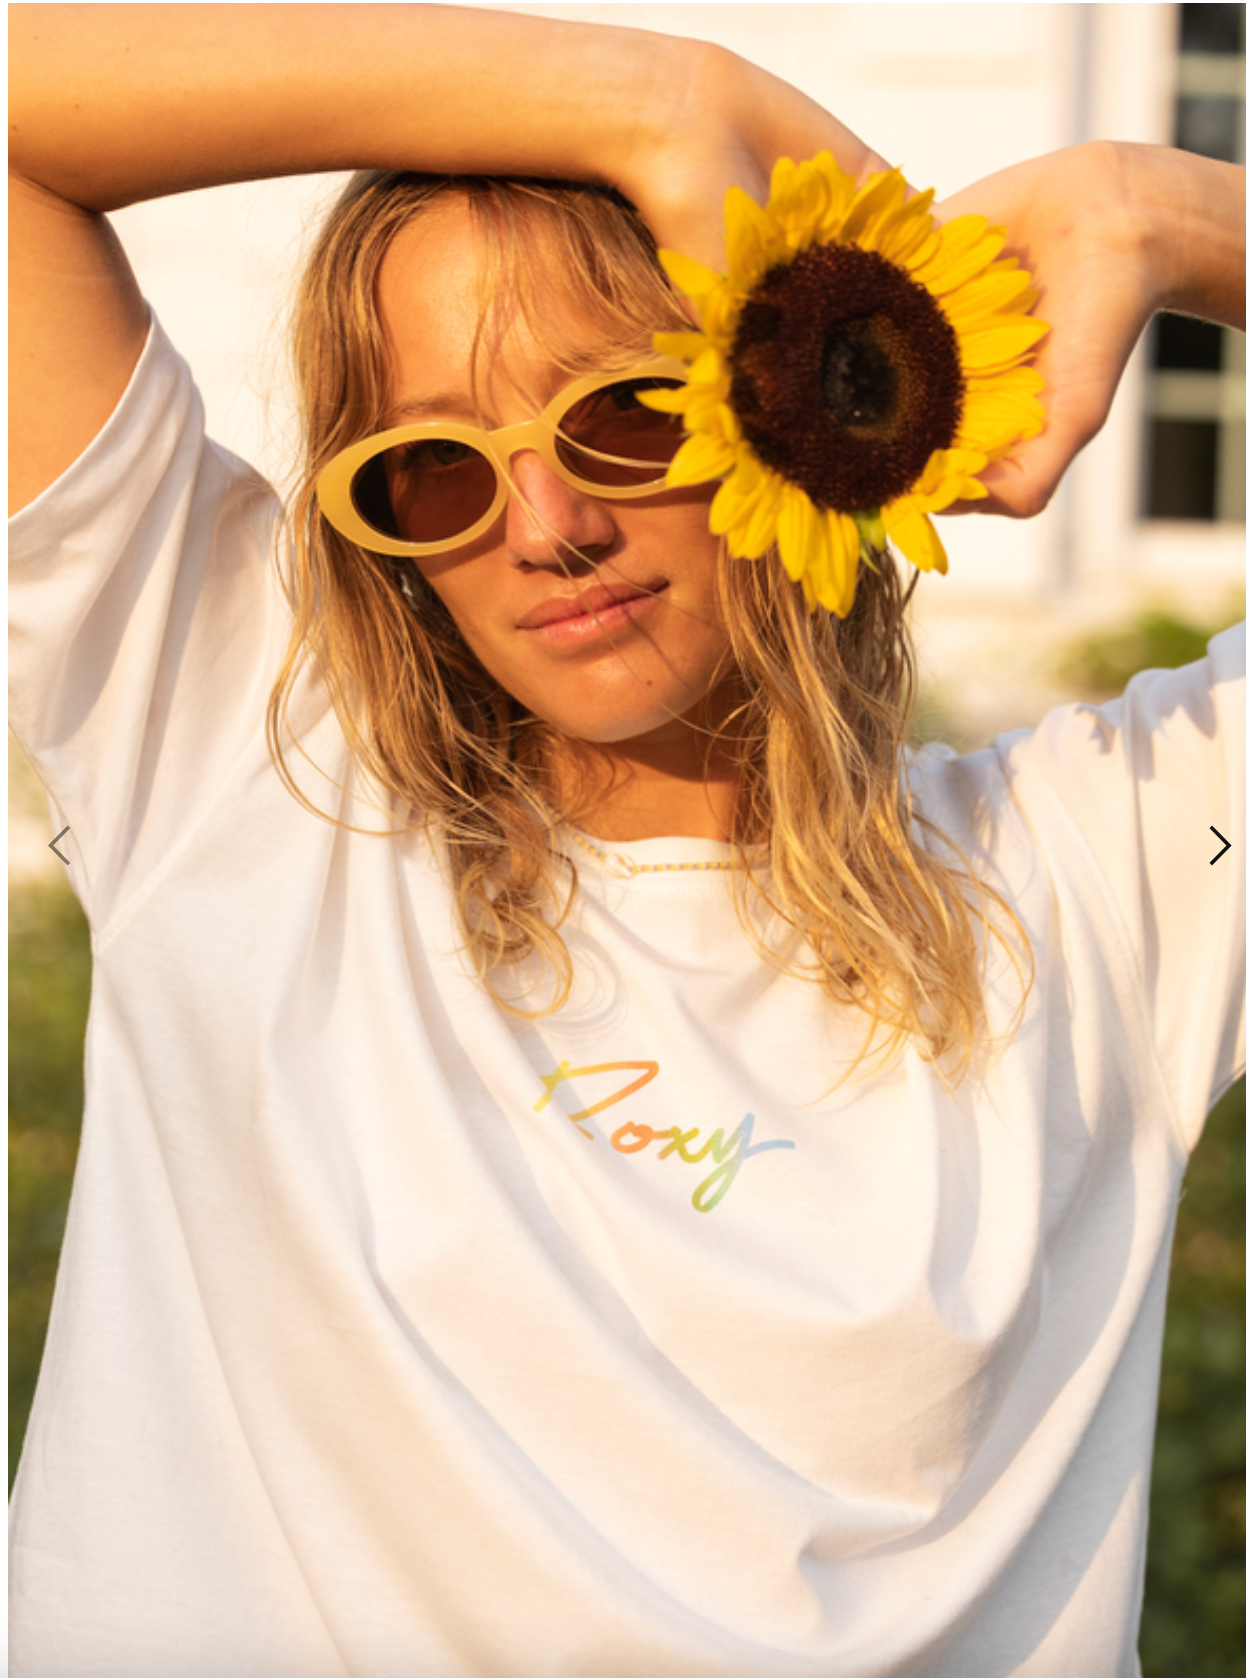 ROXY Easy And Basic T-SHIRT ===SALE===